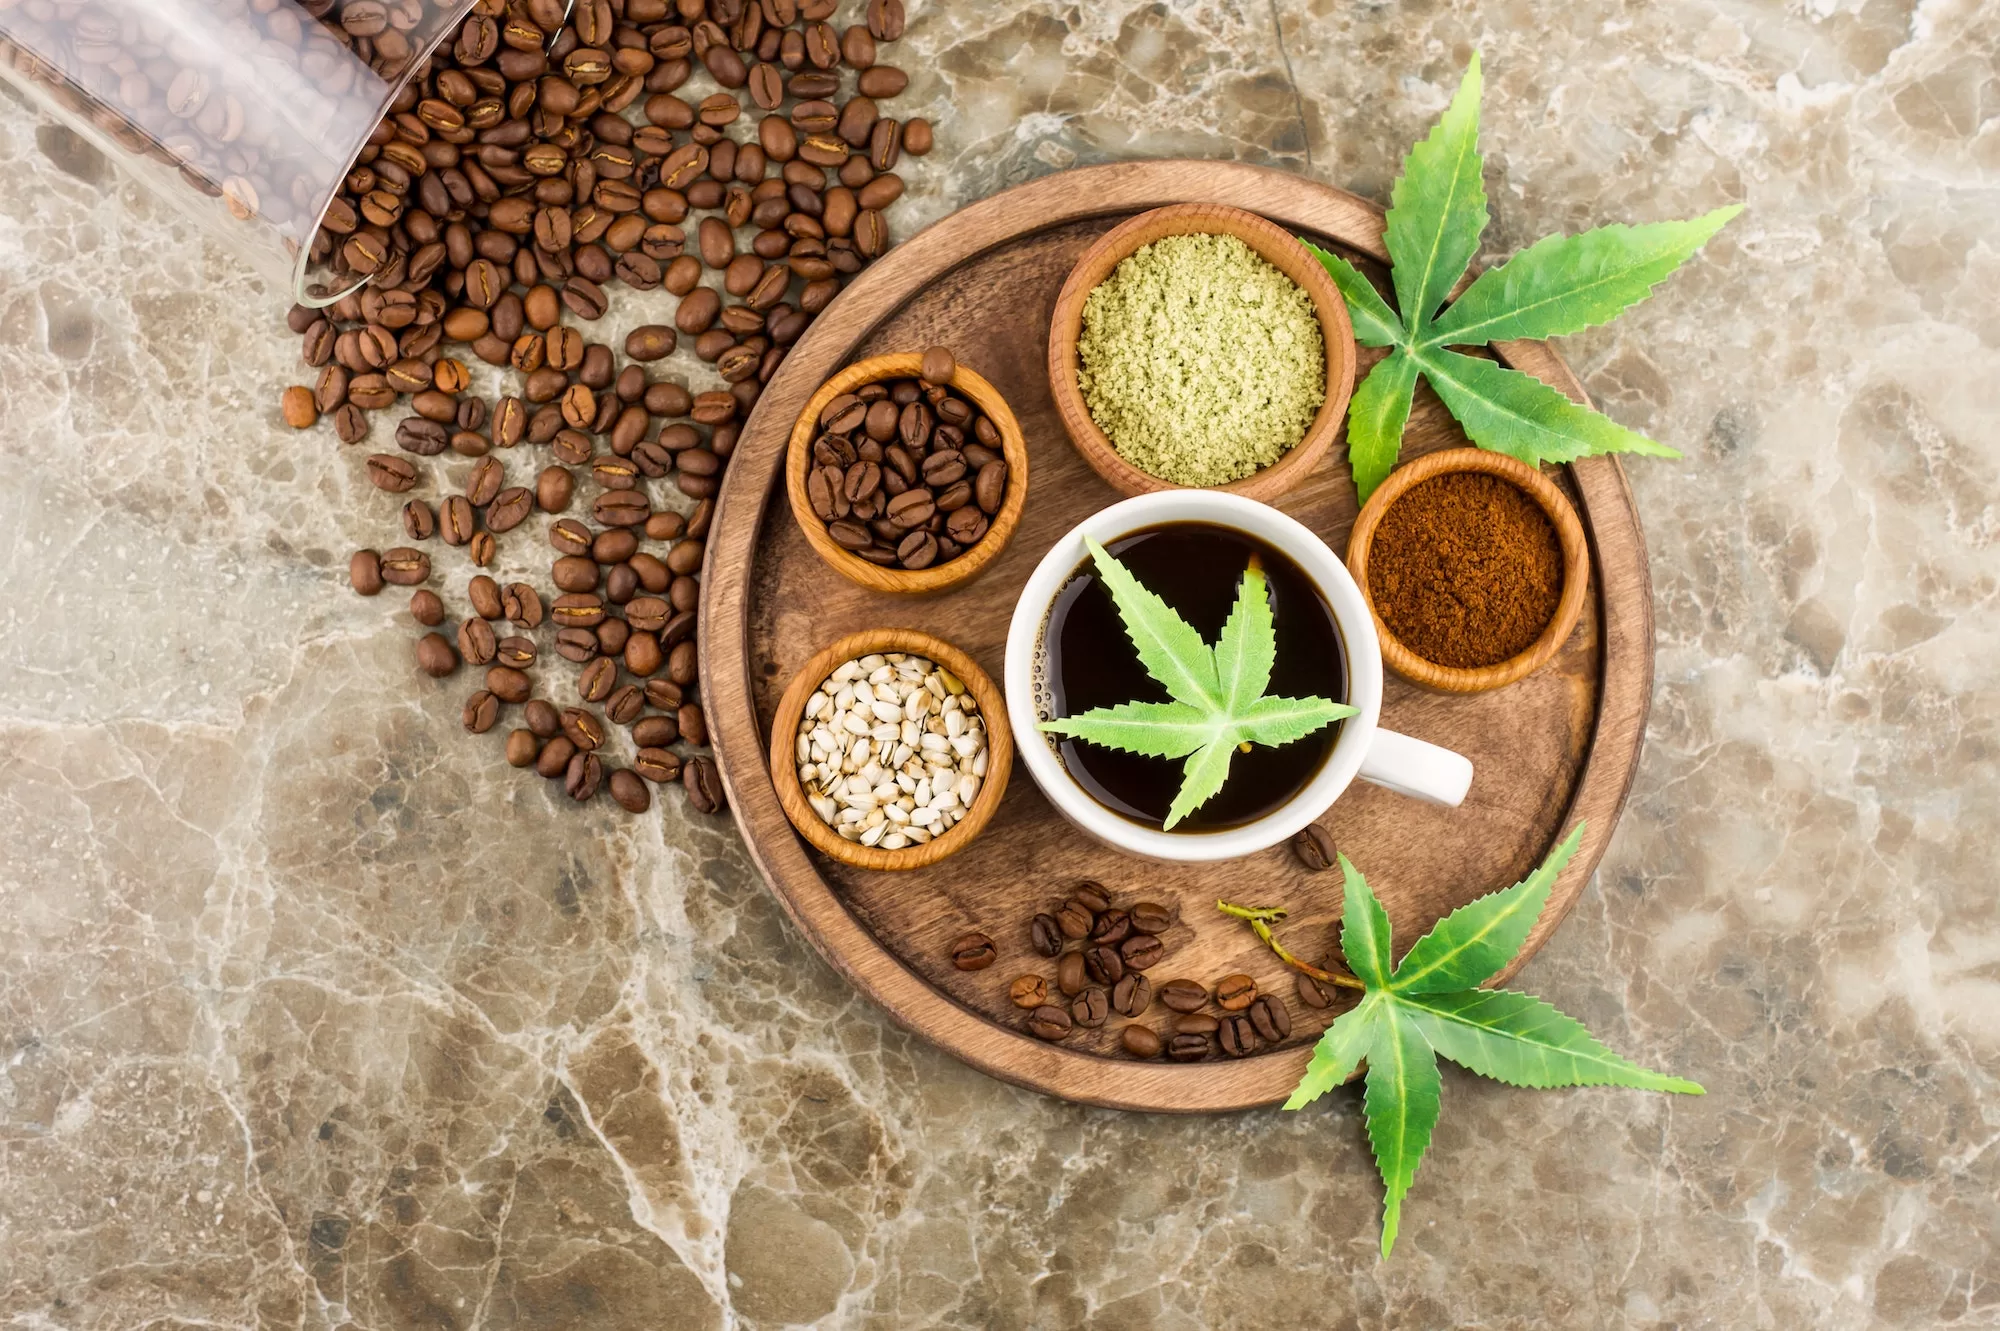 coffee beans, a cup of freshly brewed coffee with cannabis, morijuana seeds and leaves on a tray.